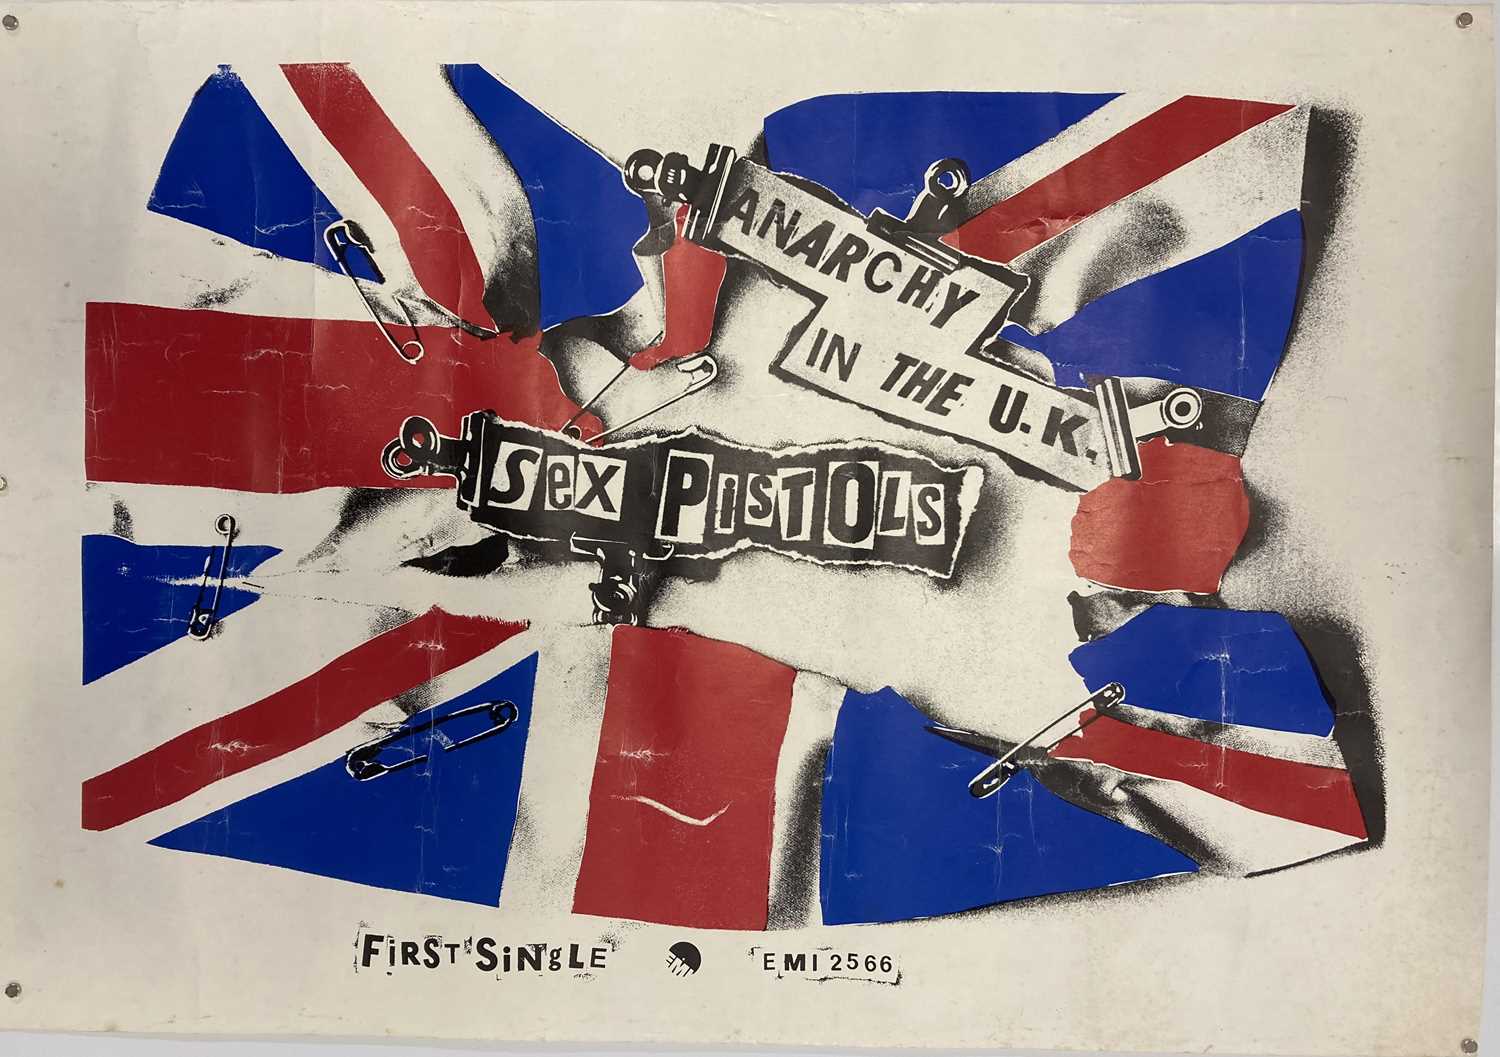 Lot 381 Sex Pistols Anarchy Poster 